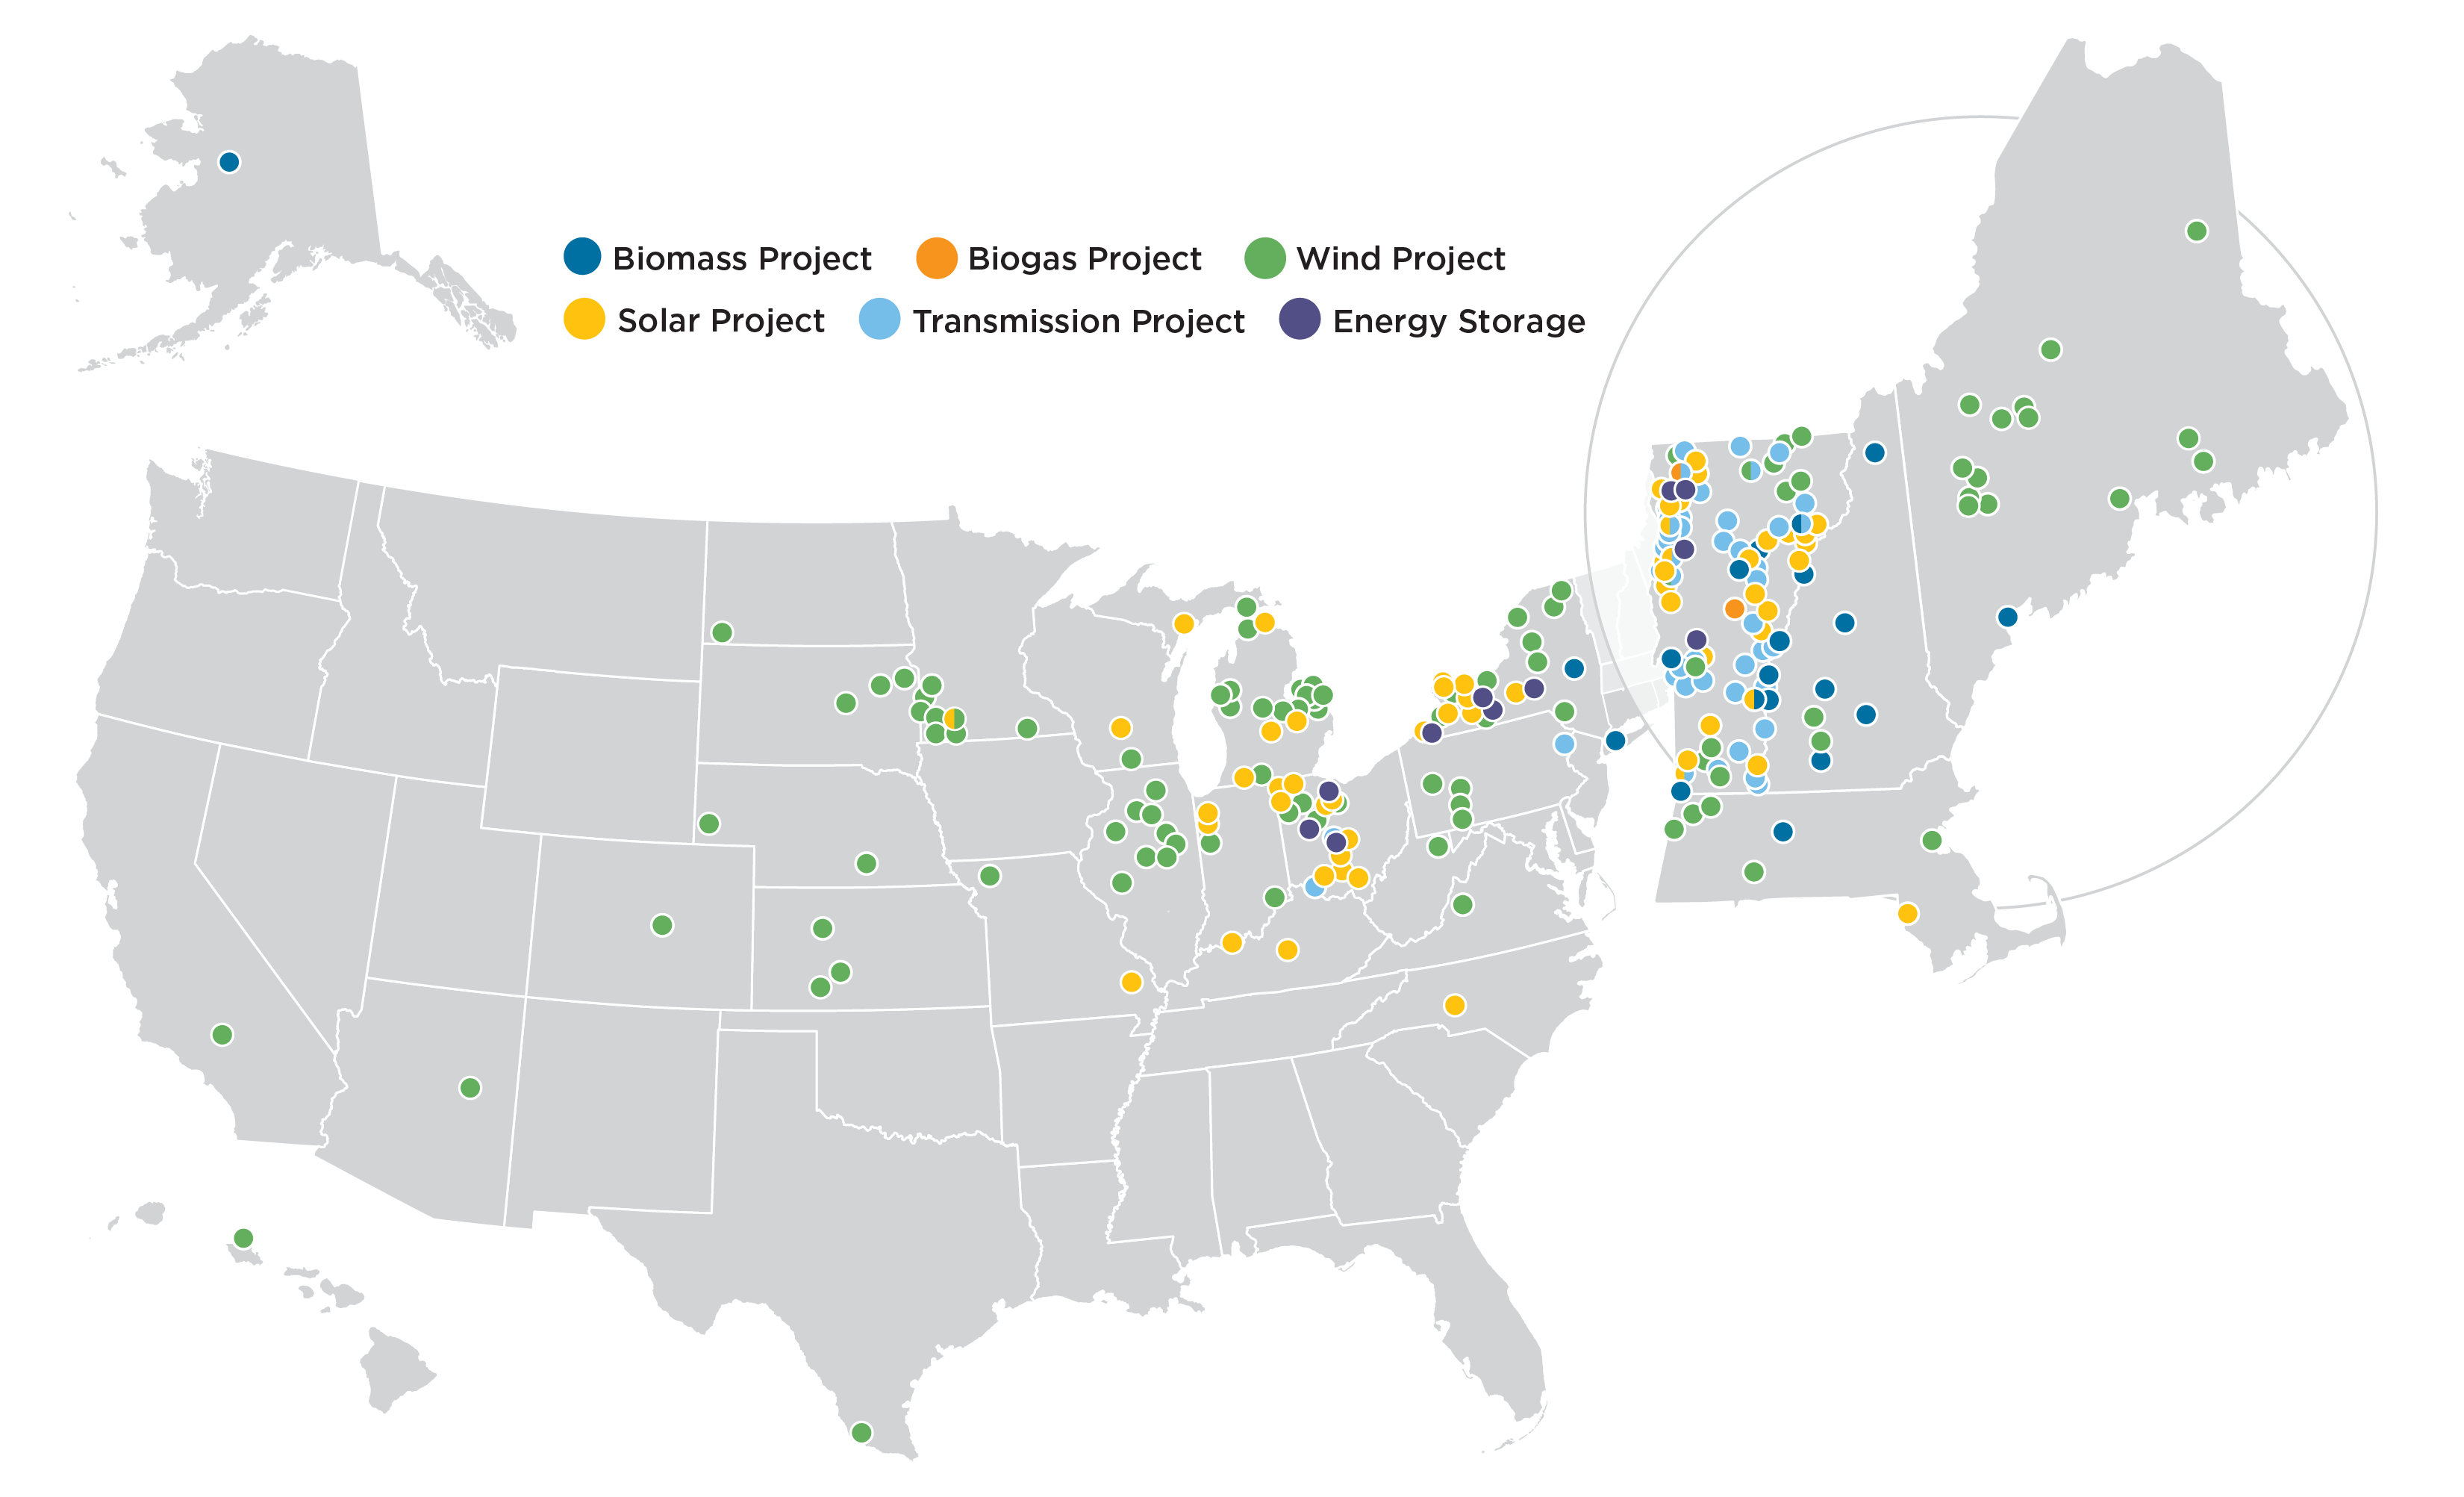 A map of RSG renewable energy projects across the United States. The map shows biomass, biogas, wind, solar, transmission, and energy storage projects. Each project location is marked by a dot.